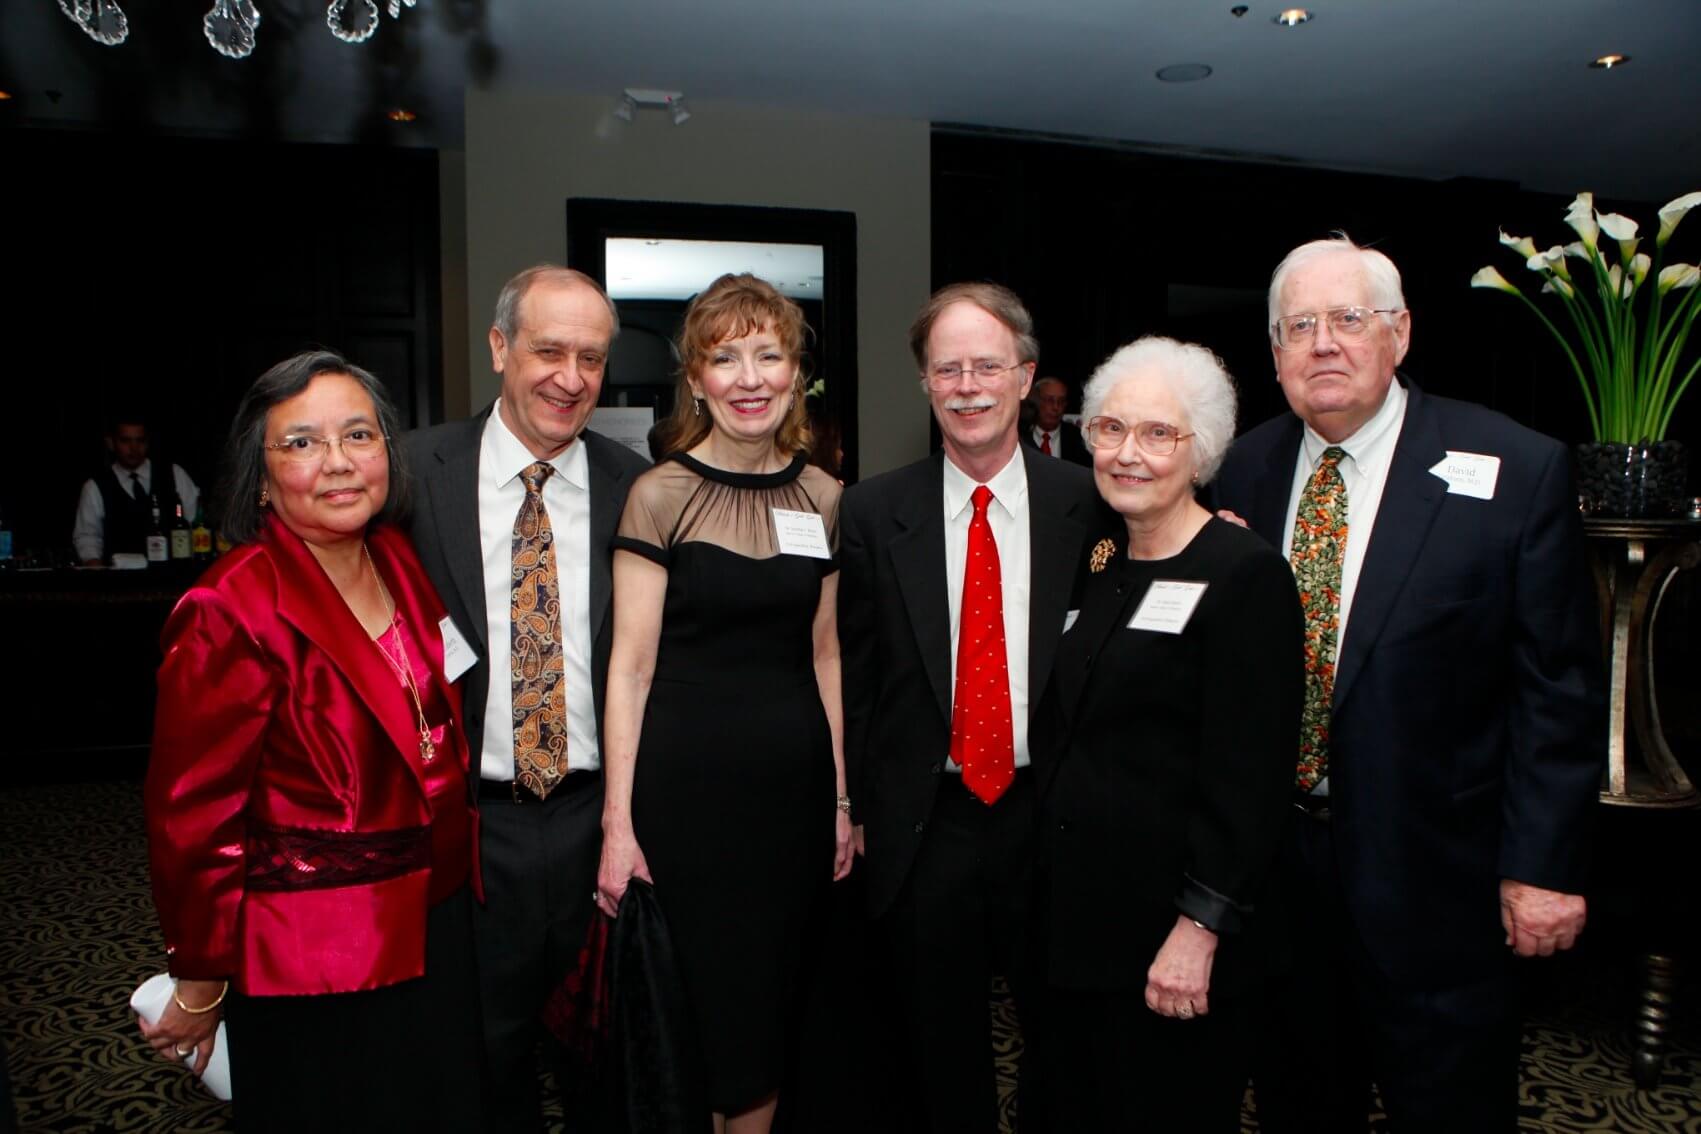 Elizabeth Torres, M.D., far left, served as co-chair for the Hearts of Gold Gala, an event that honored women in health and science (Credit: OMP)